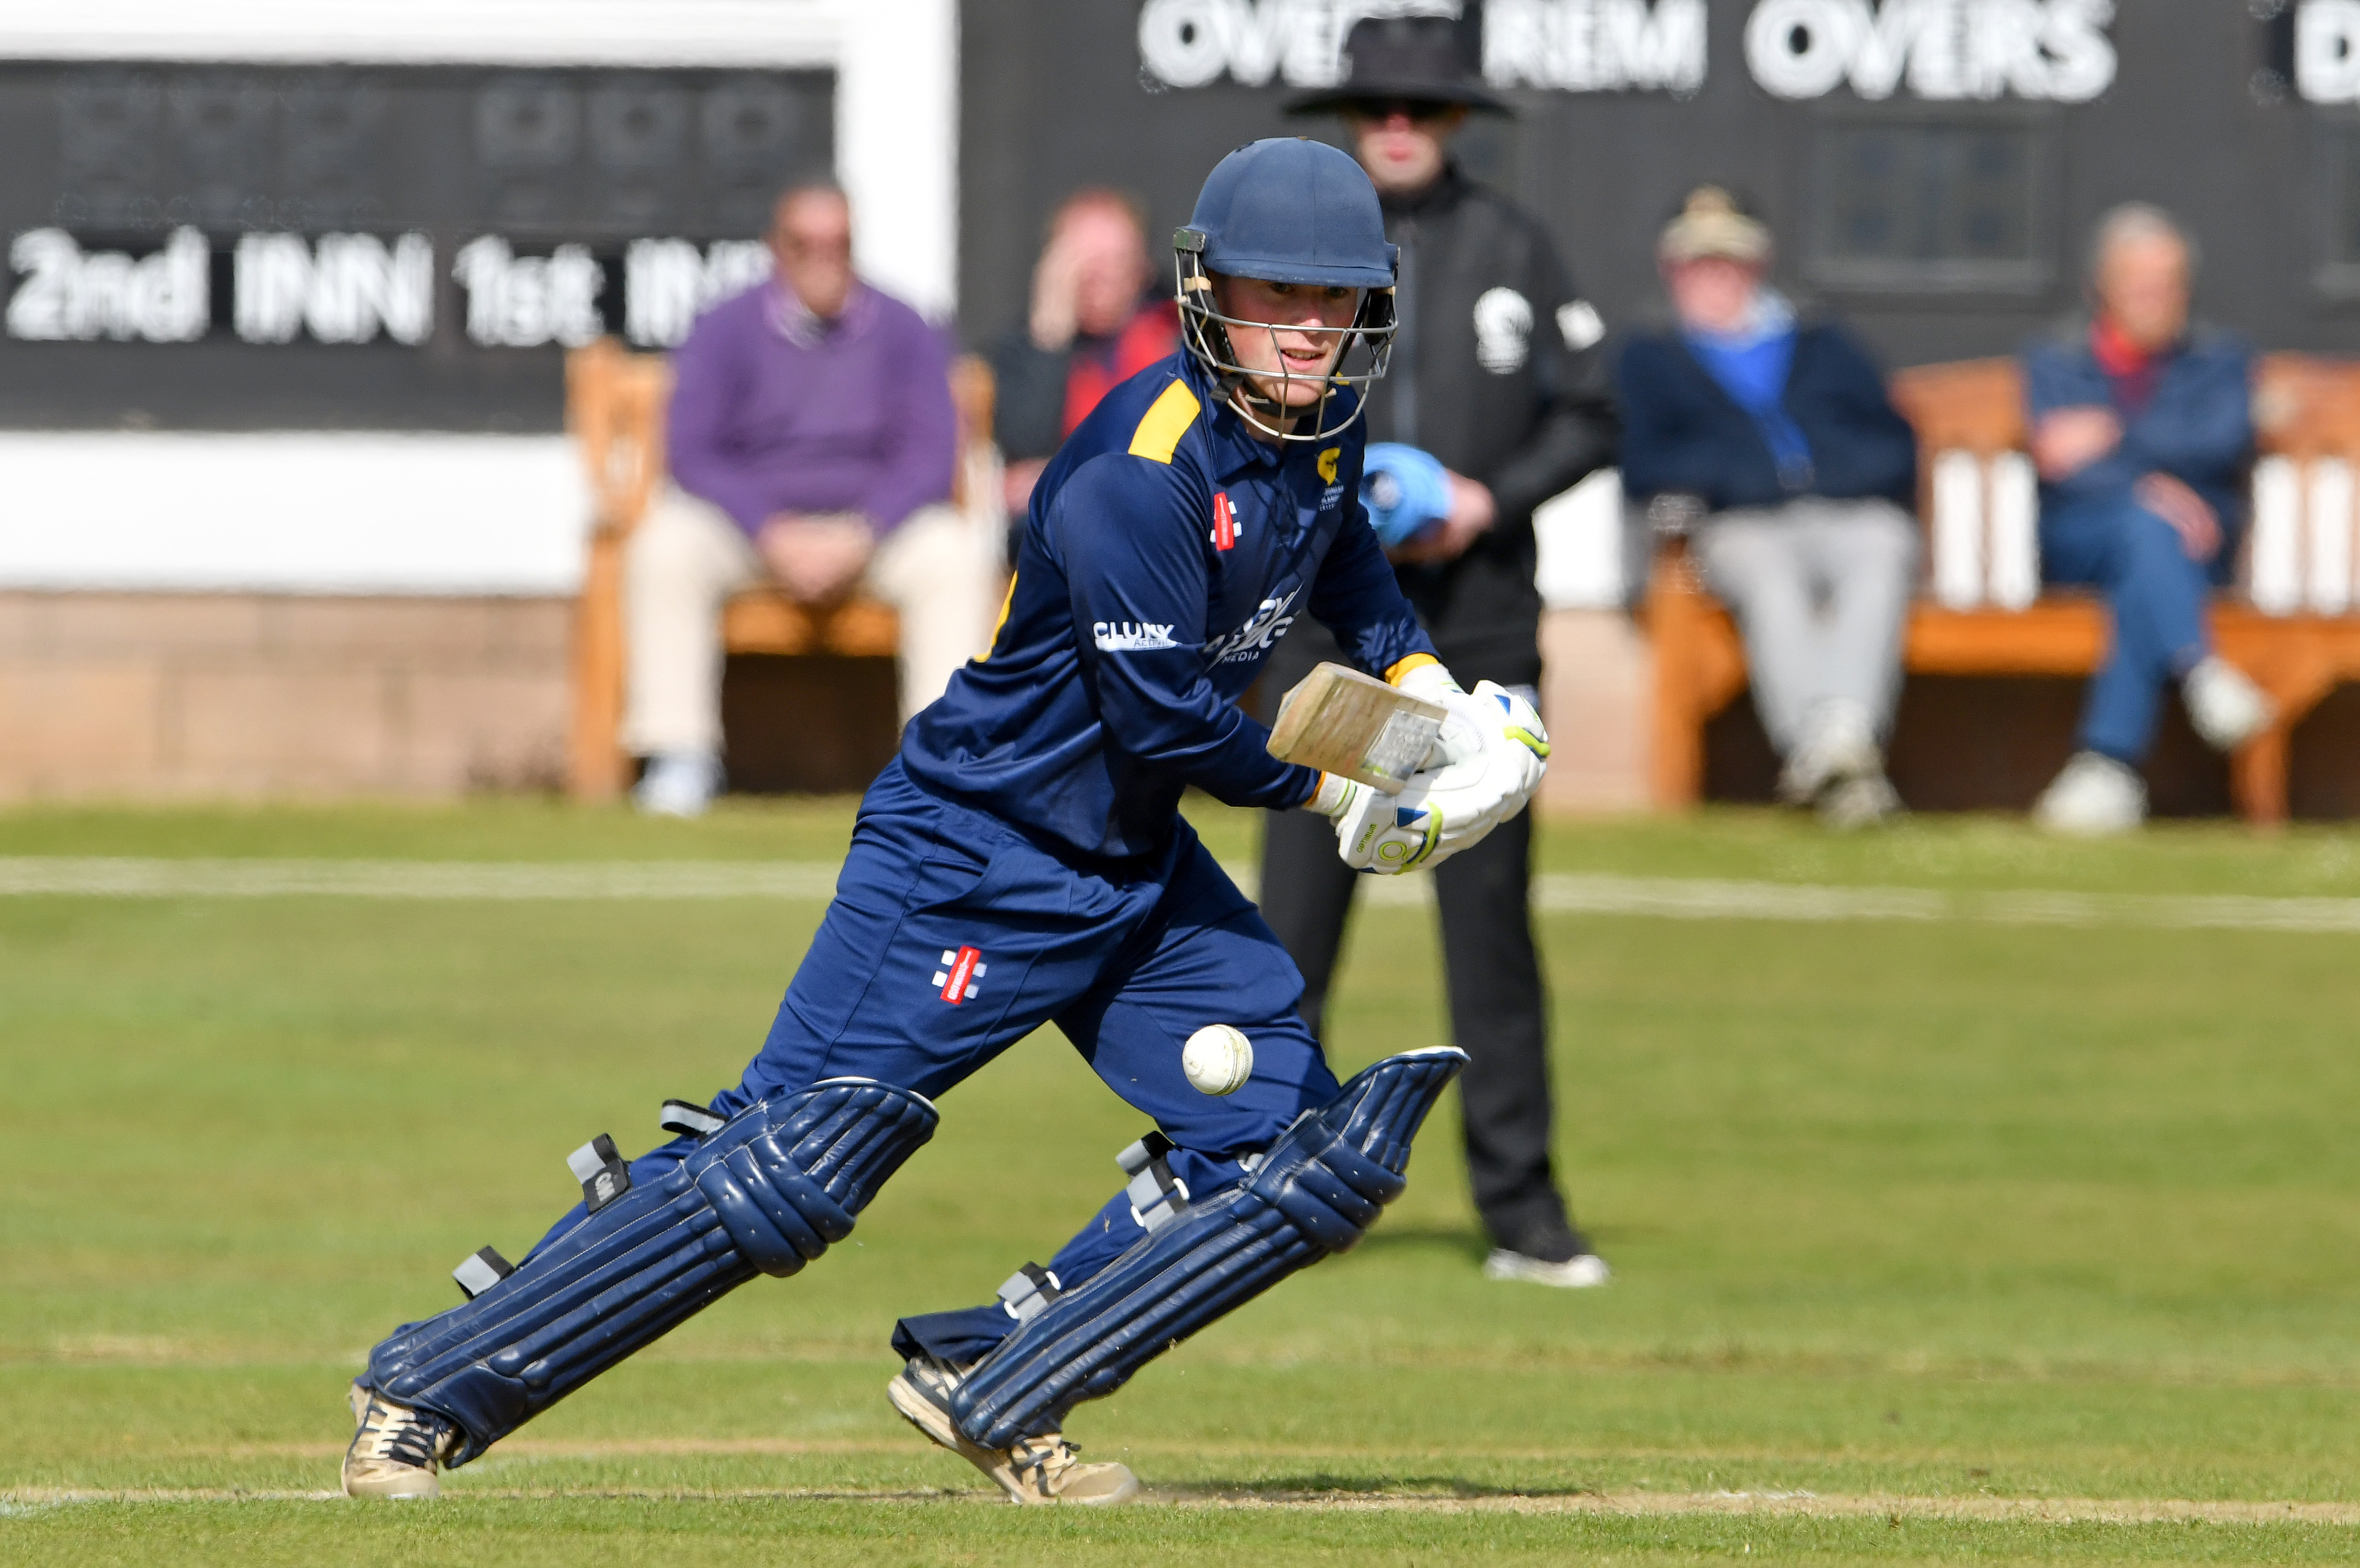 Caledonian Highlanders squad announced for Regional Series